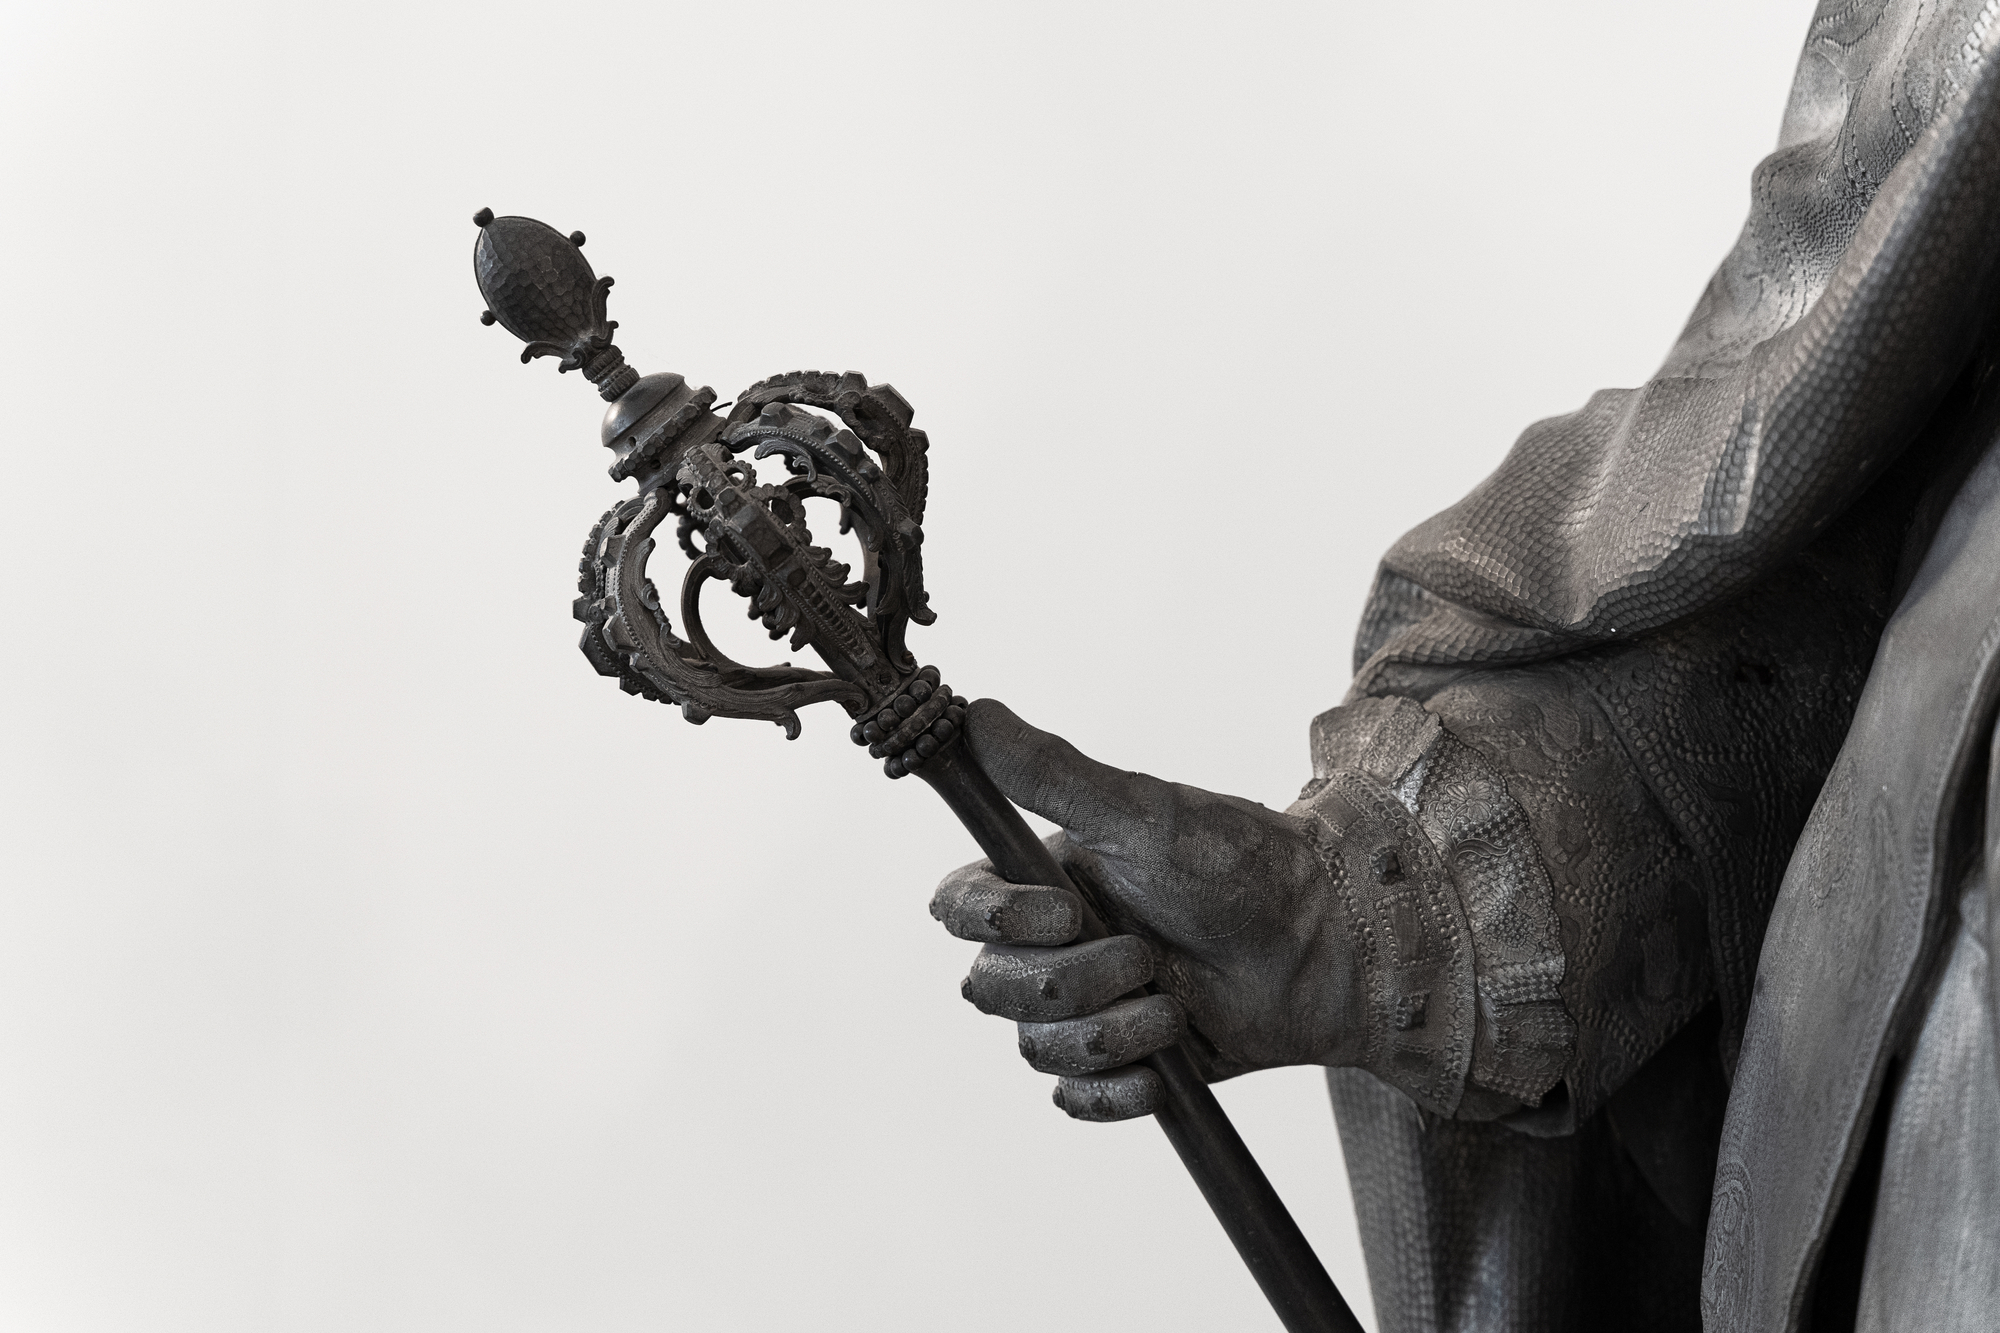 photograph of statue holding scepter